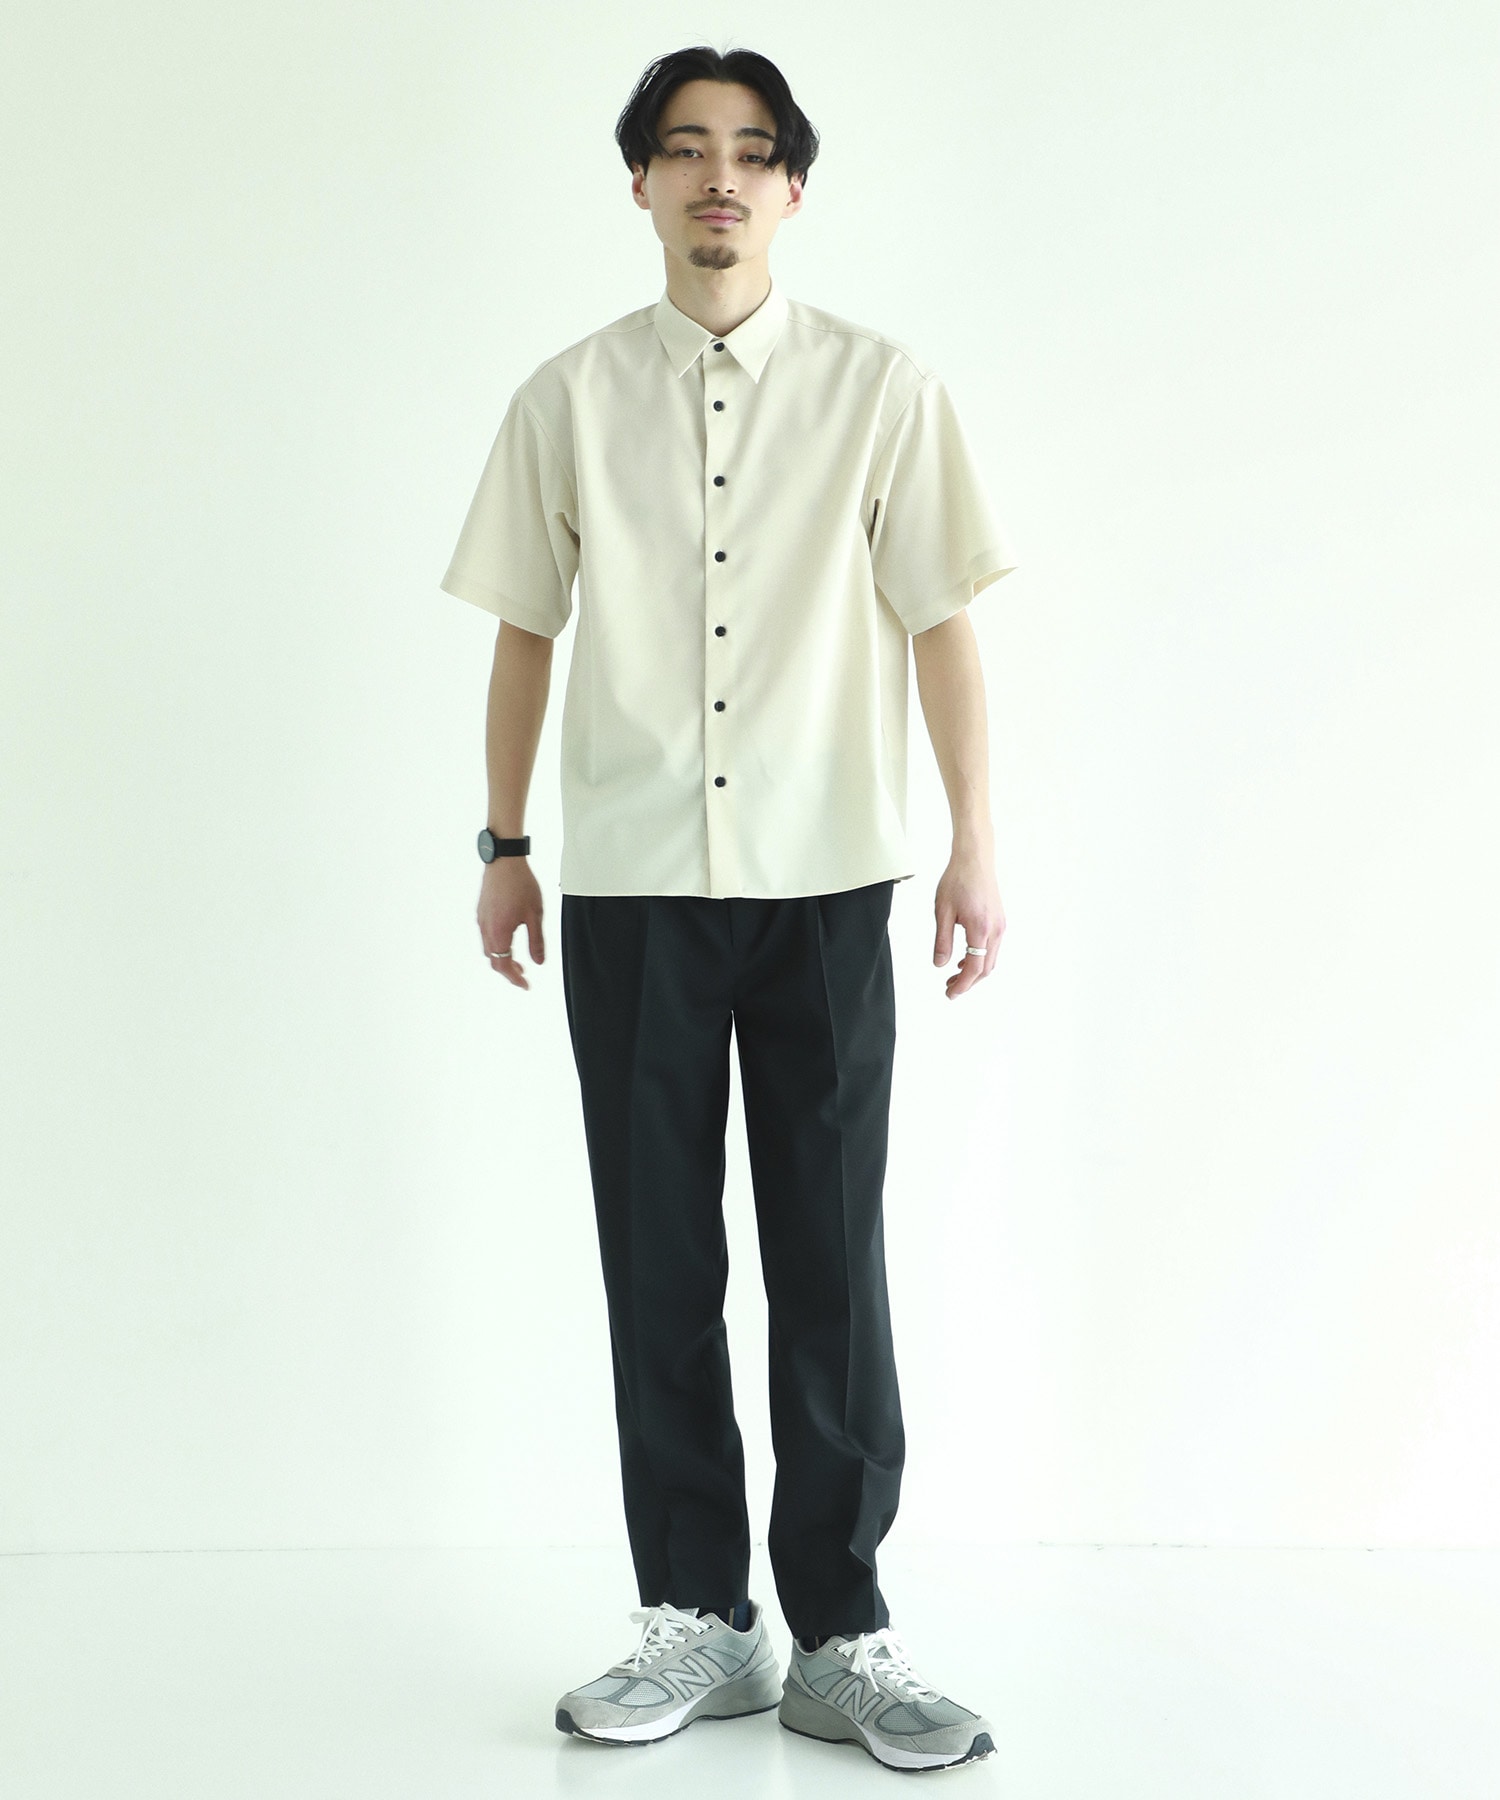 TWO SIDED S/S SHIRT BESPOKE TOKYO